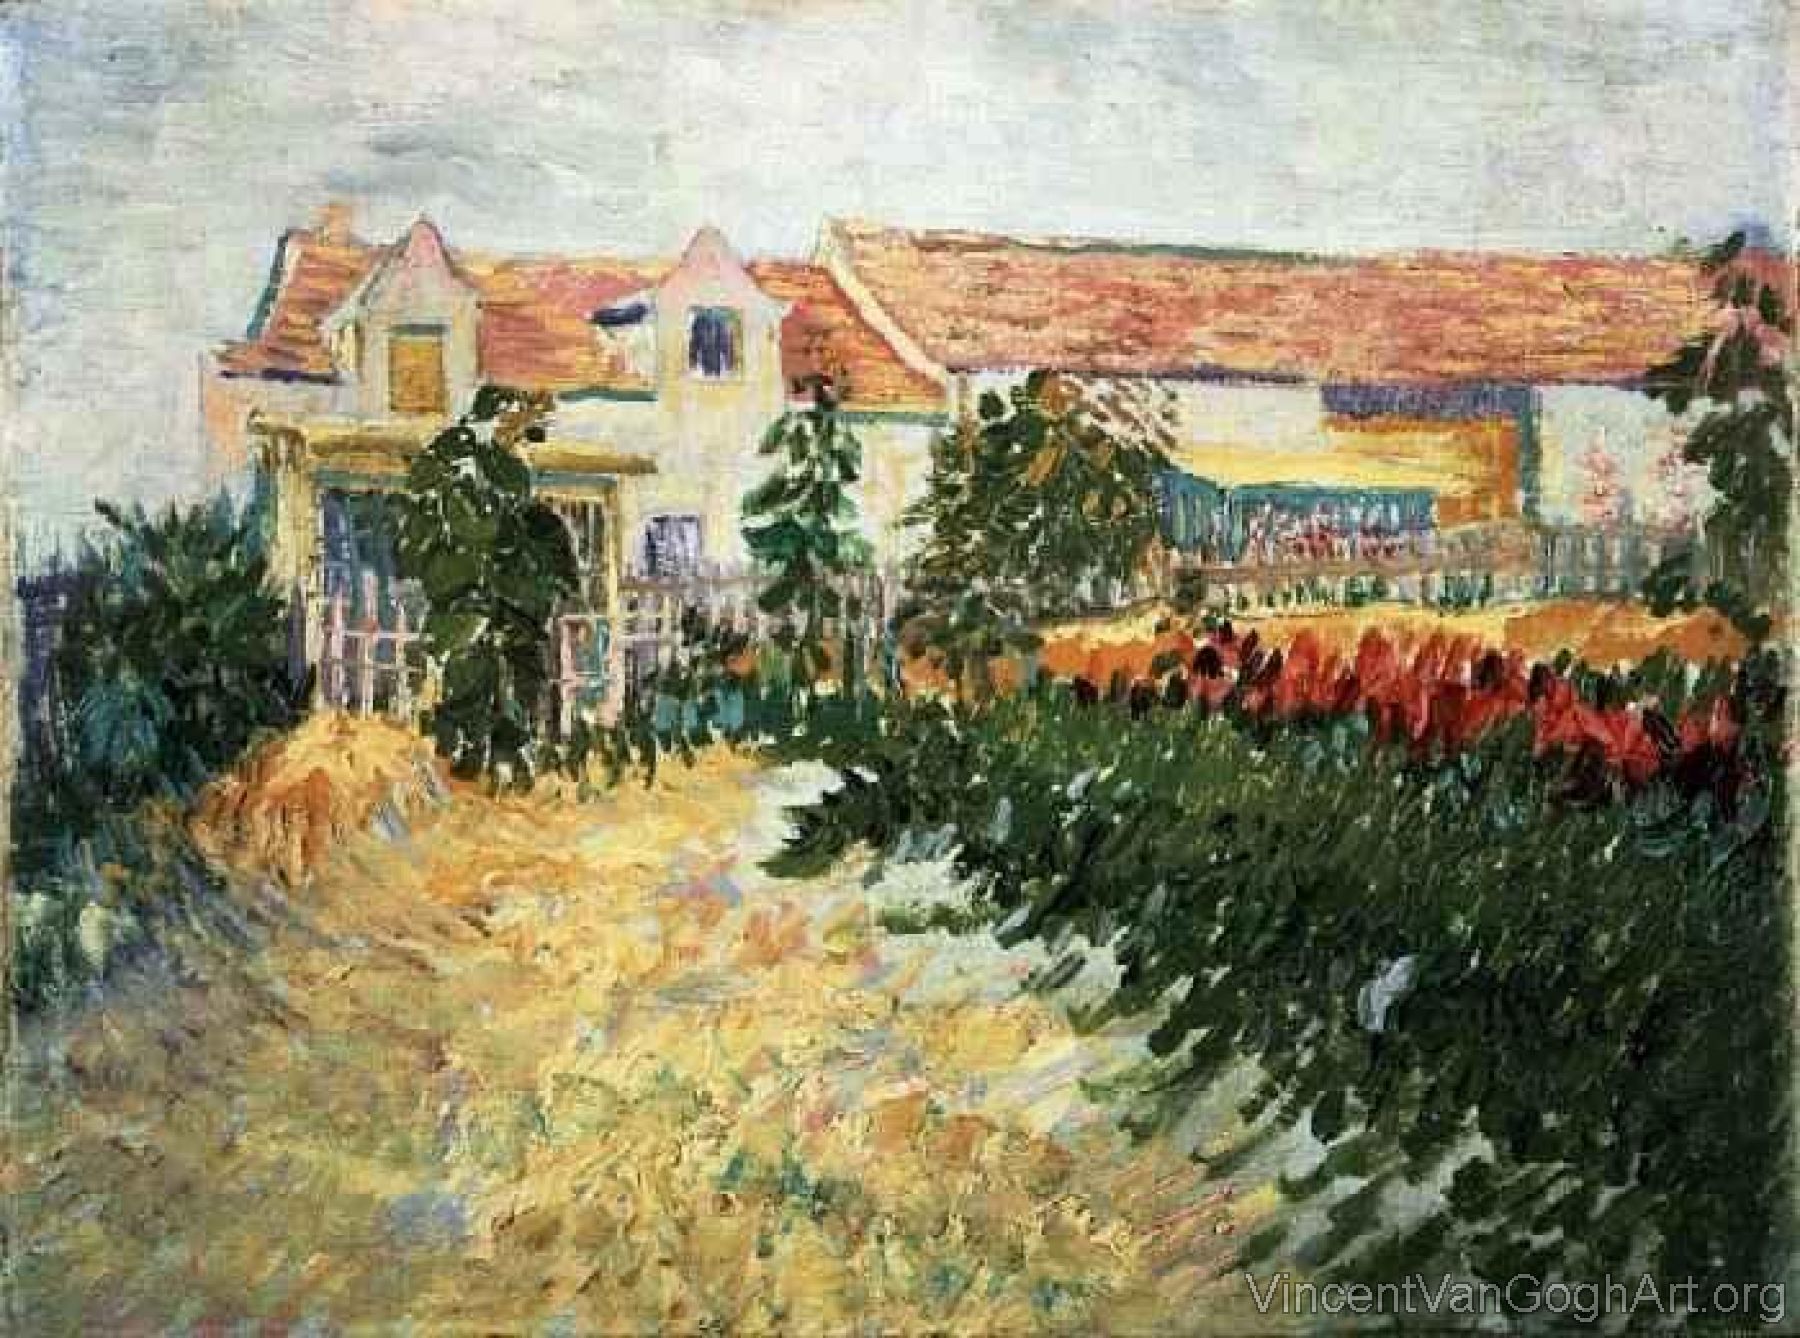 House with Sunflowers